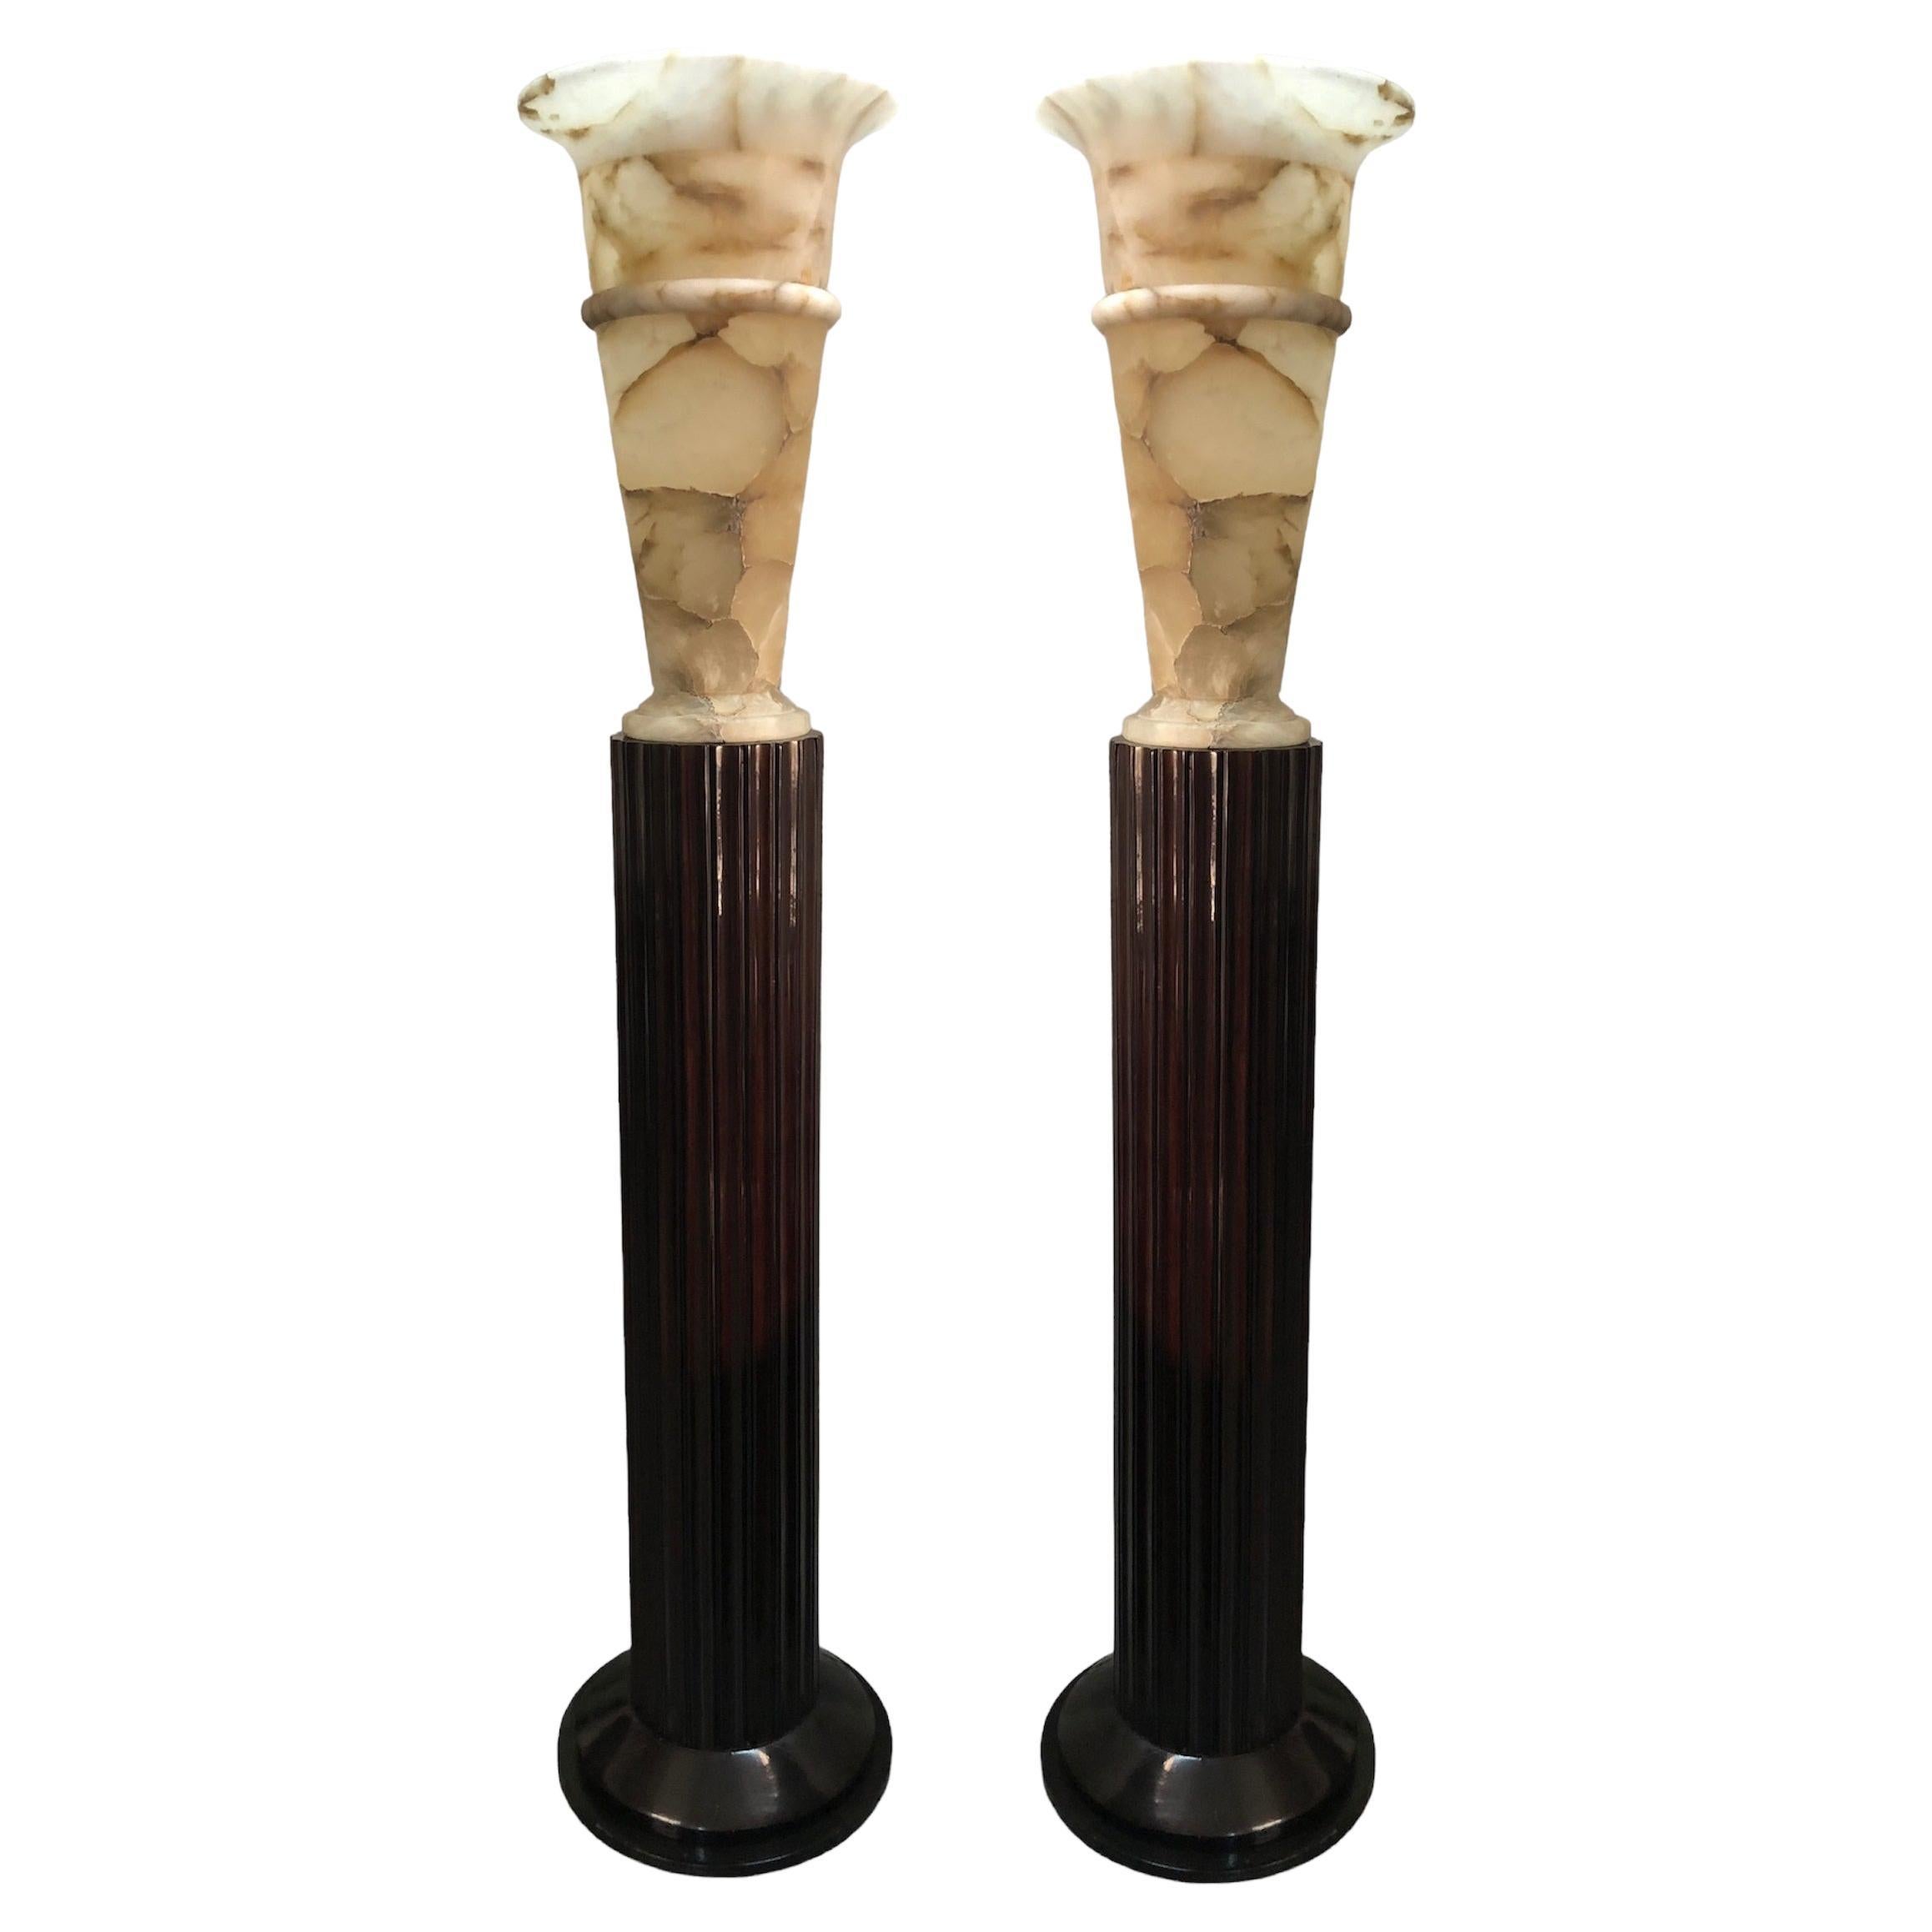 Pair of Art Deco Floor Lamps, France, Materials: Wood and Alabaster, 1930 For Sale